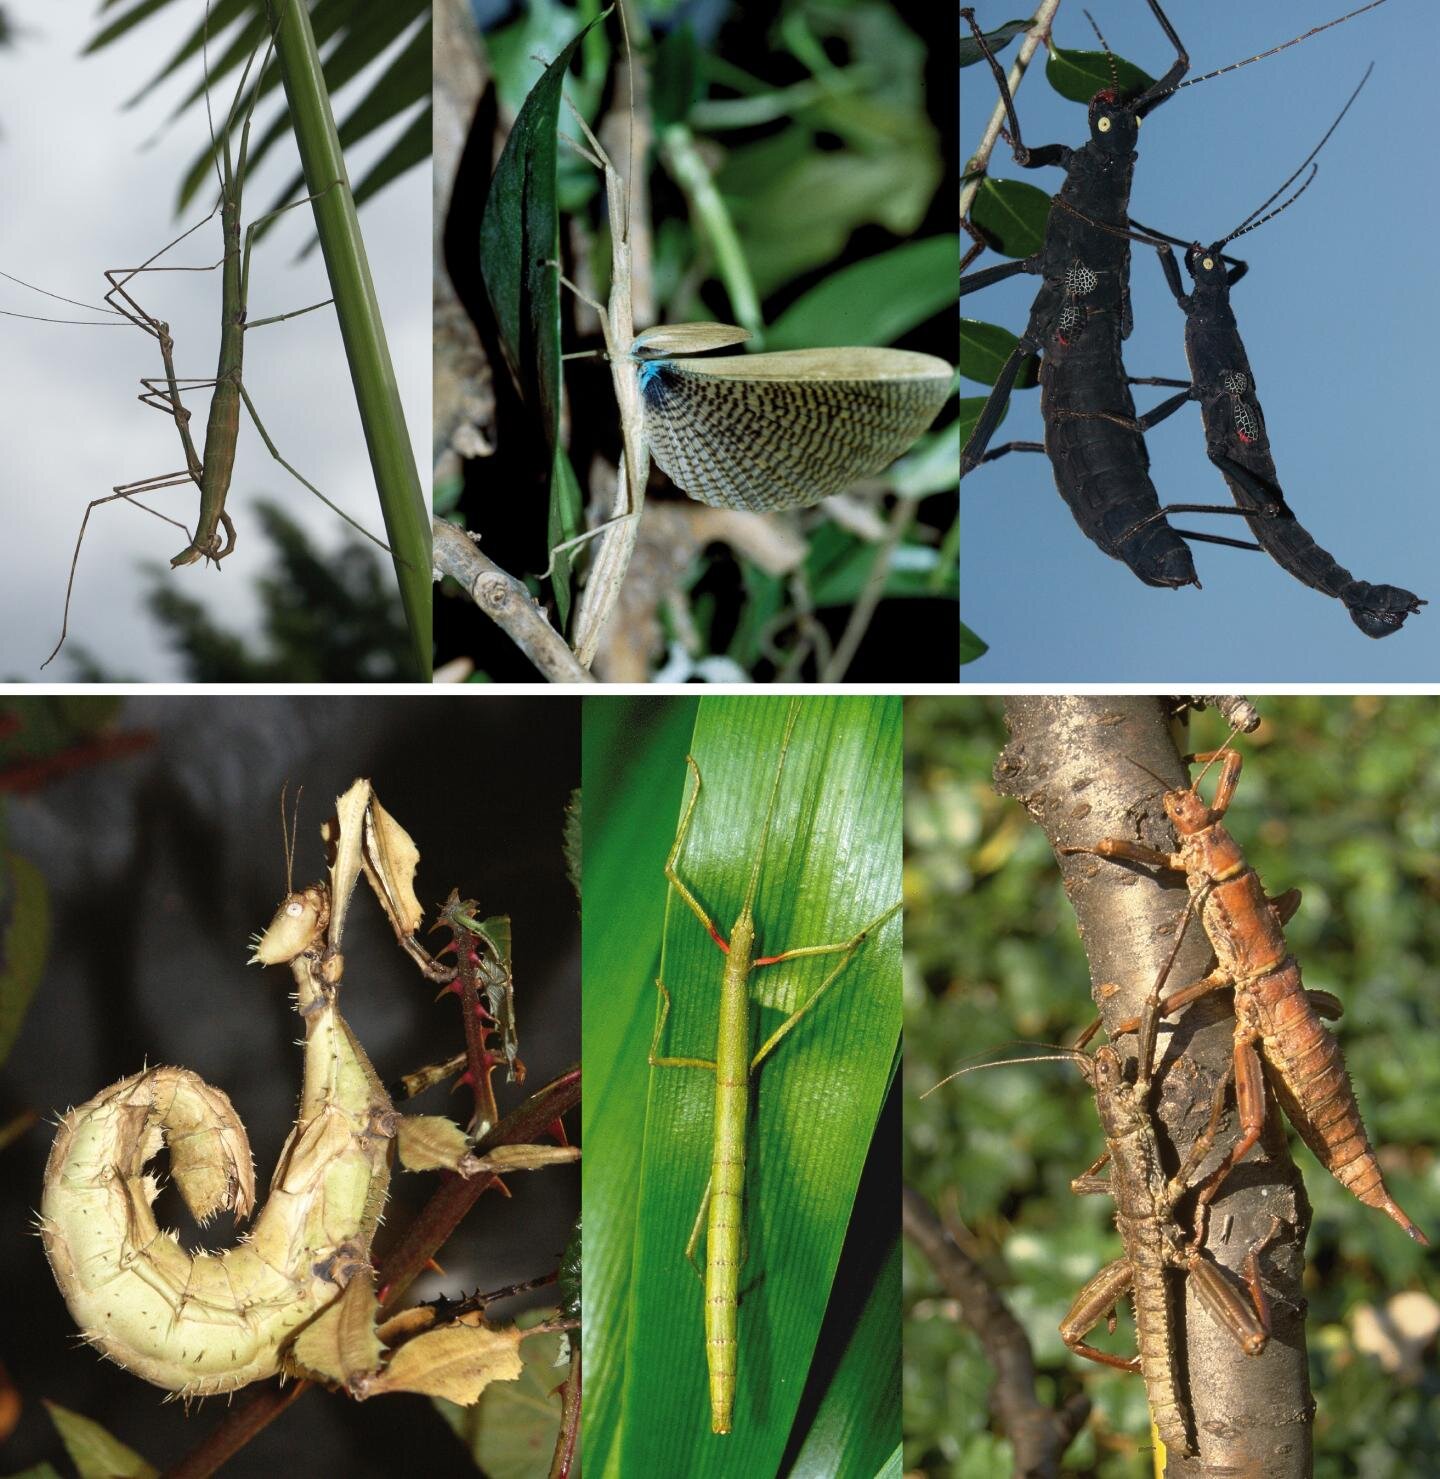 Was early stick insect evolution triggered by birds and mammals?